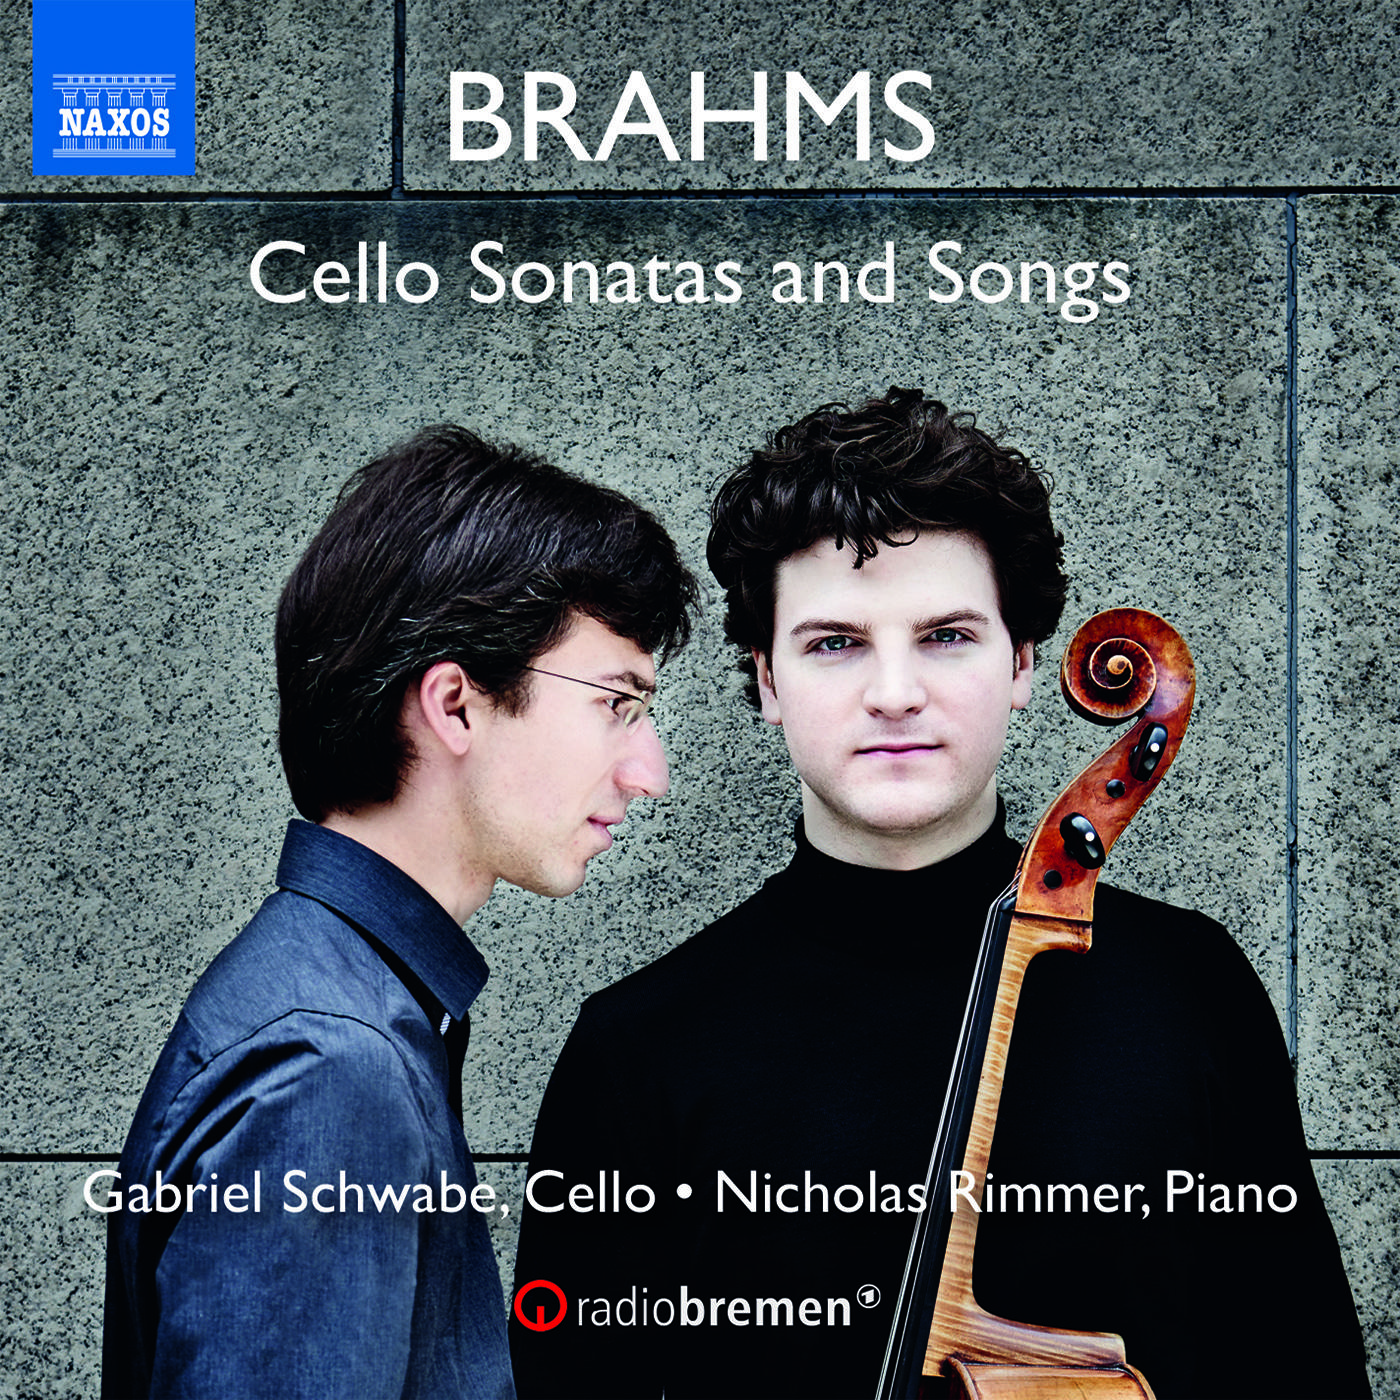 BRAHMS, J.: Cello Sonatas Nos. 1 and 2 / 6 Lieder (arr. G. Schwabe and N. Rimmer for cello and piano) (G. Schwabe, Rimmer)